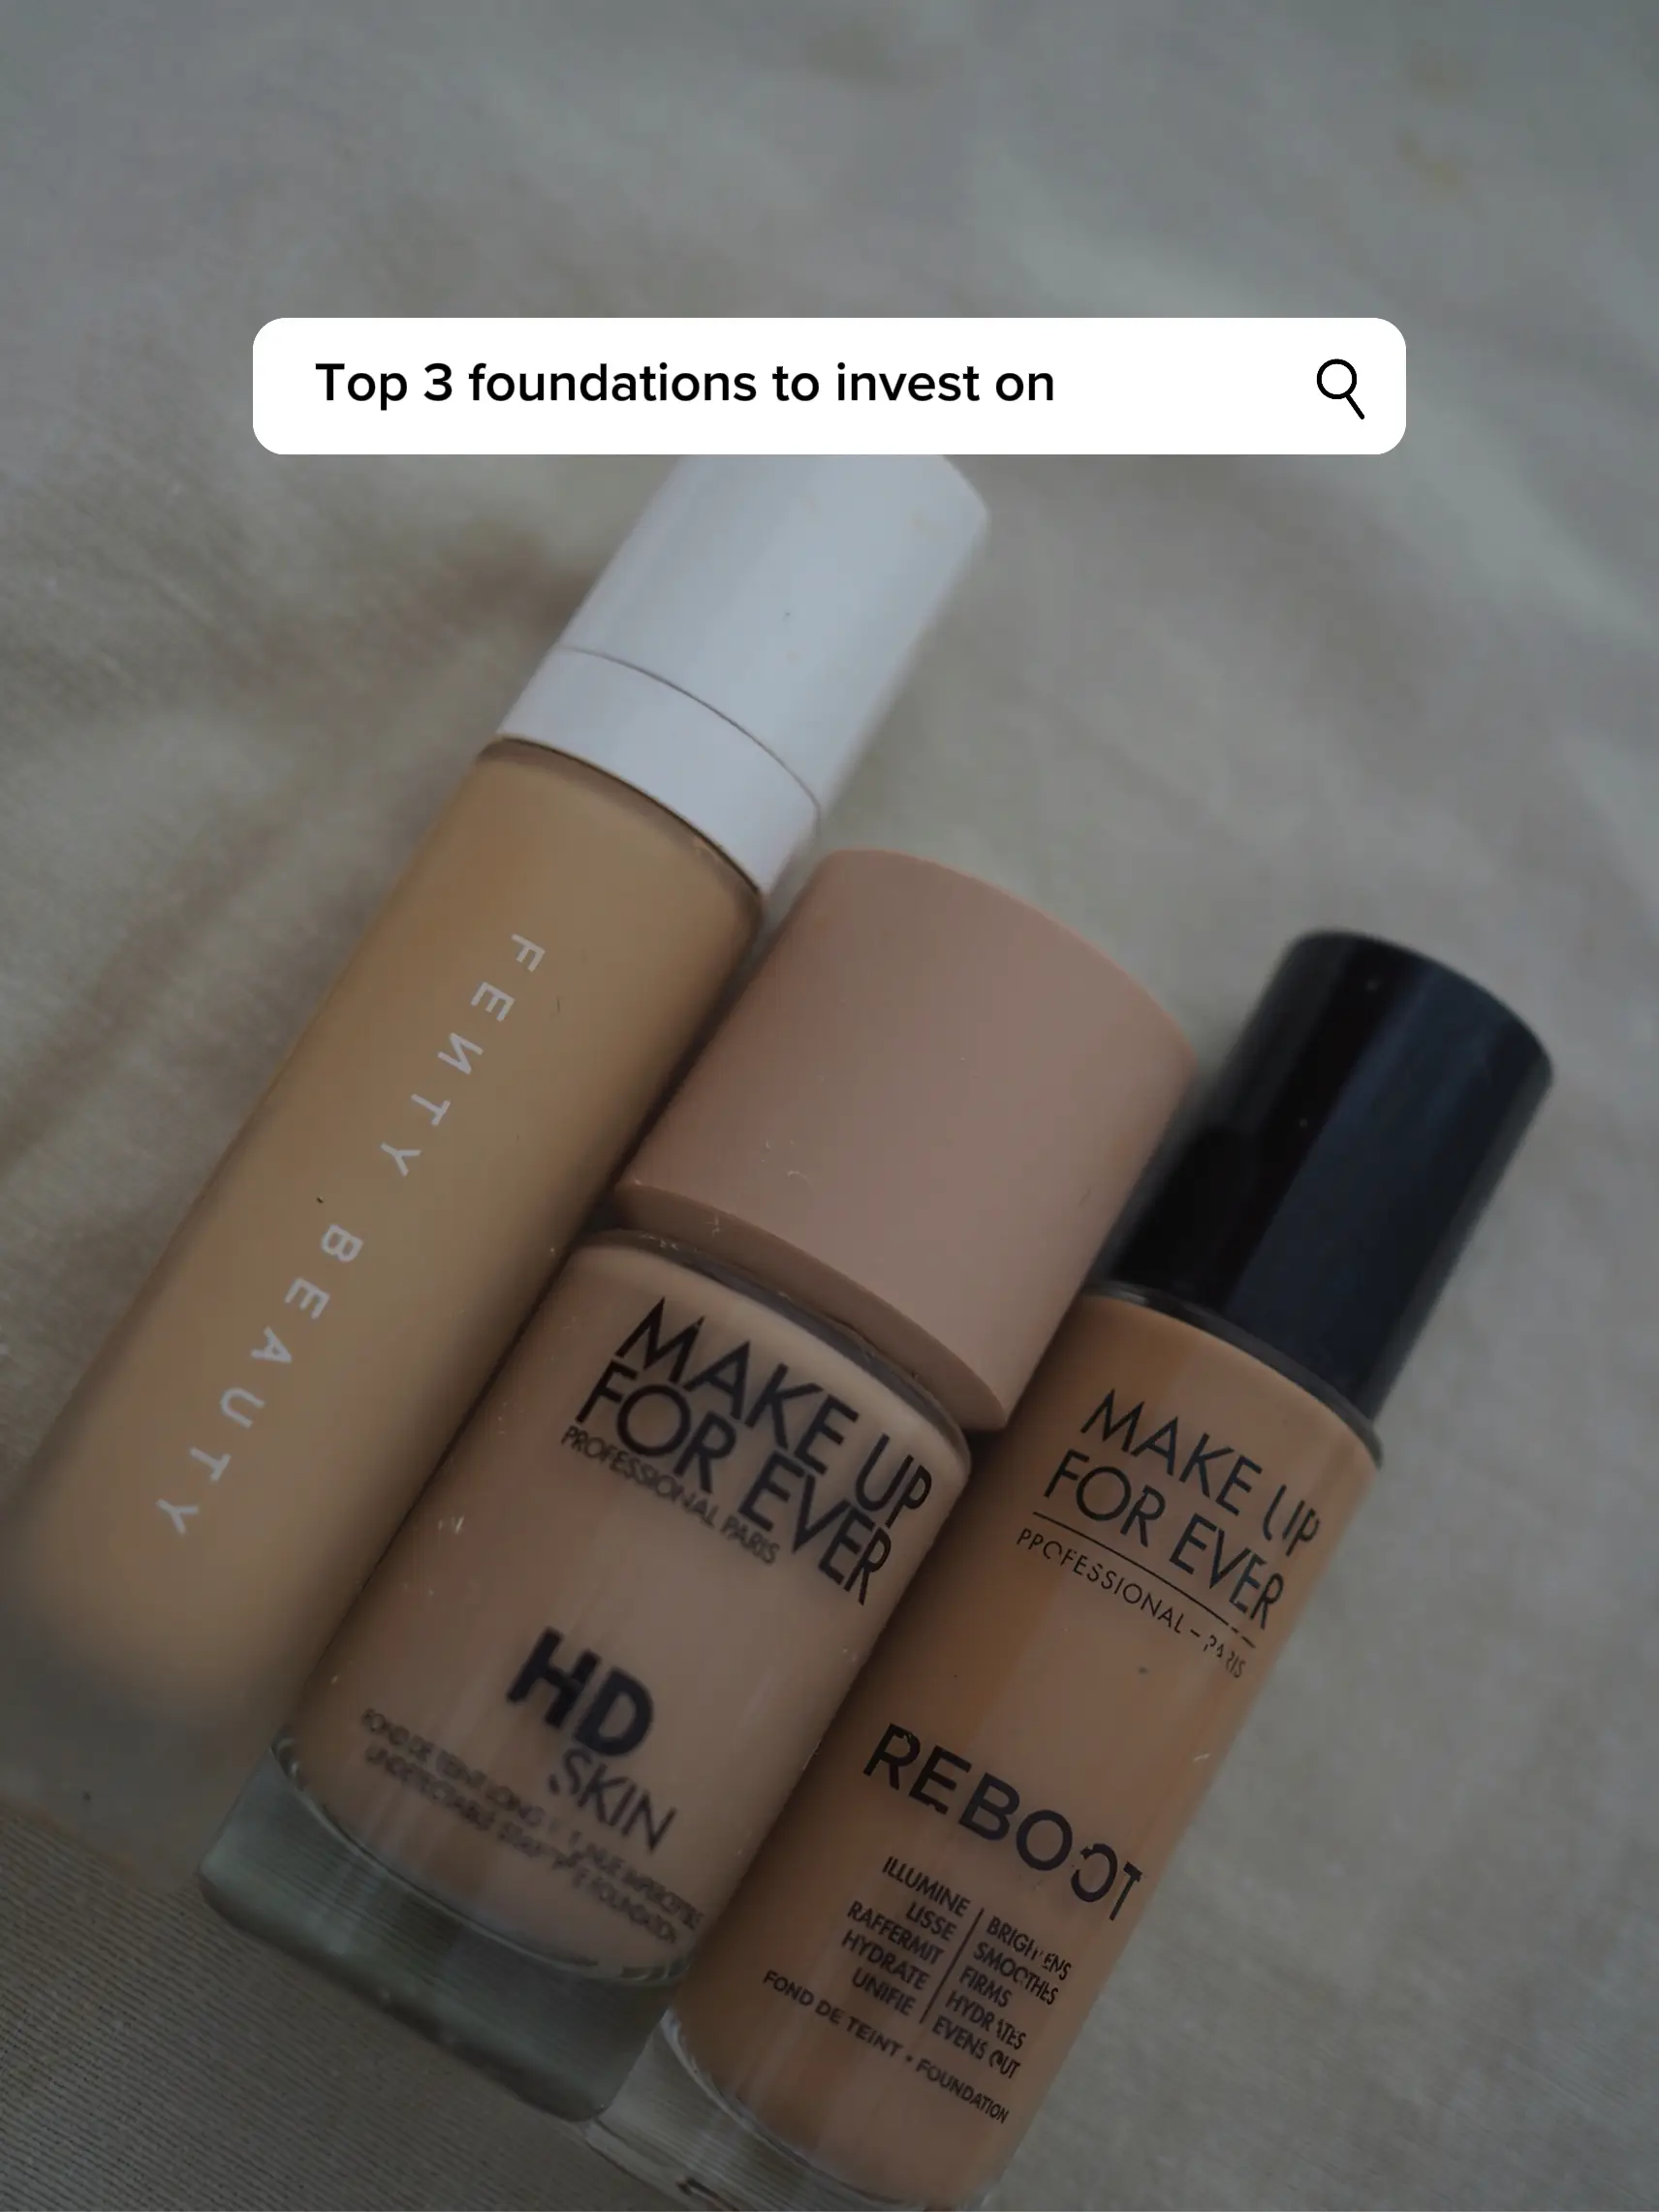 Top 3 foundations to have | Gallery by C A L L I E | Lemon8